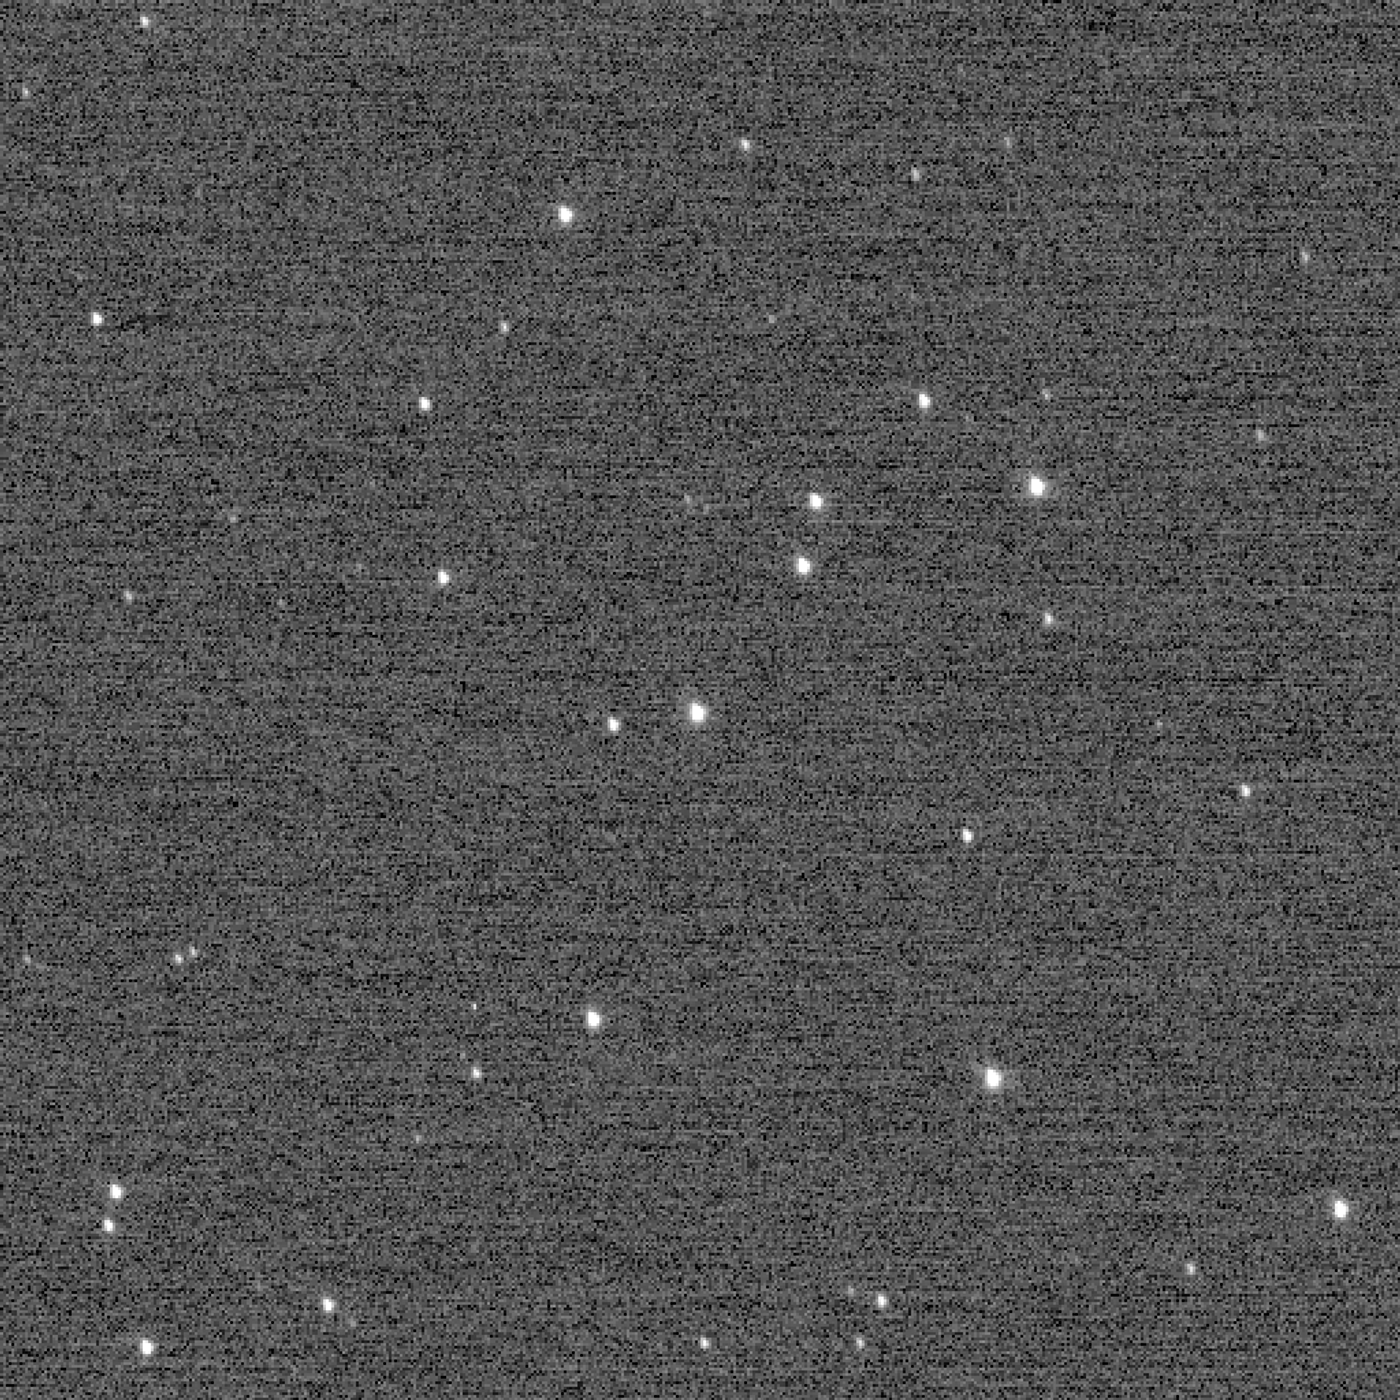 This was the most distant photograph ever taken from Earth, thanks to New Horizons. It shows the "Wishing Well" star cluster.